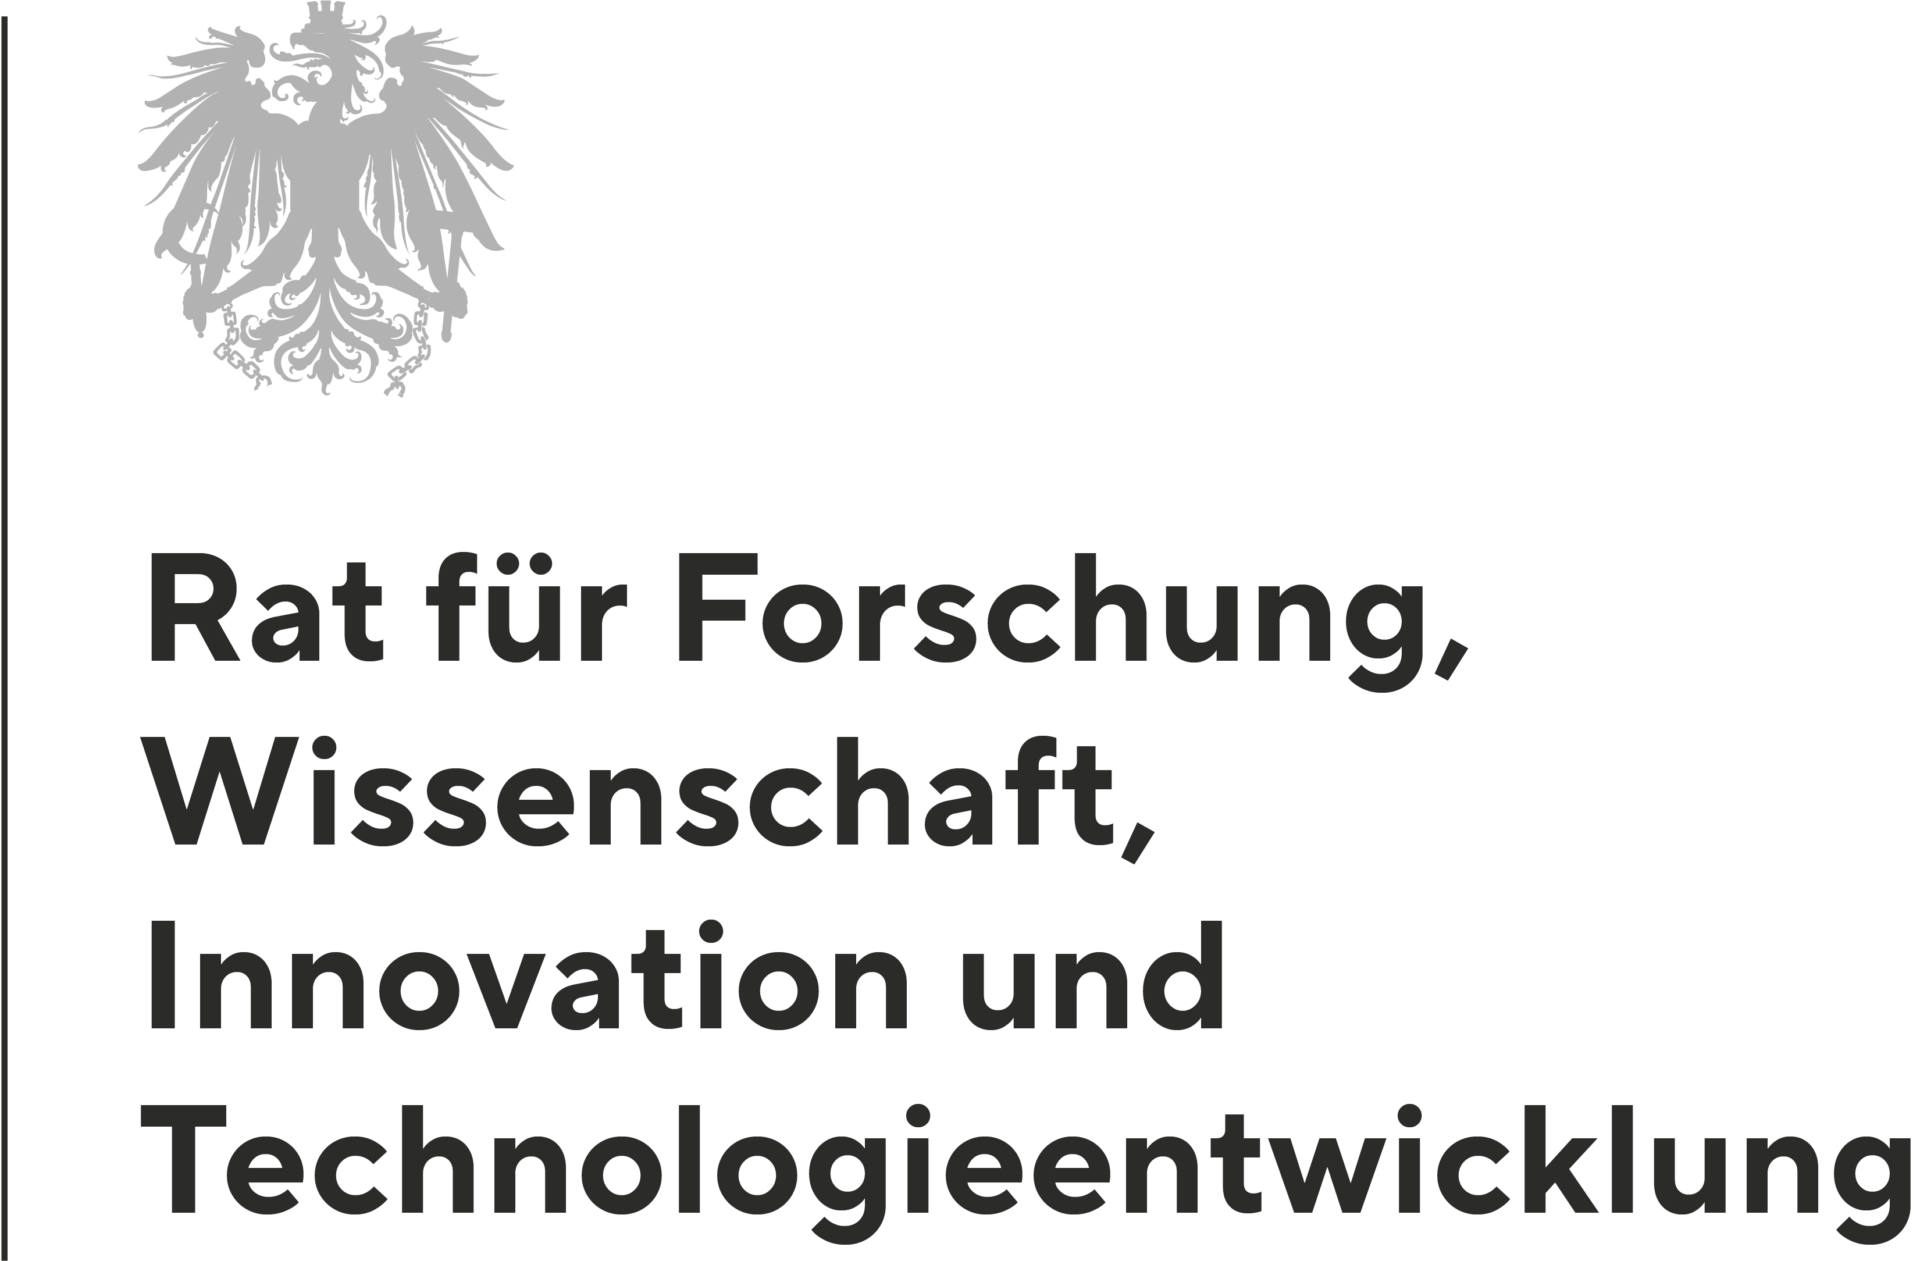 Austrian Council for Research, Science, Innovation and Technology Development